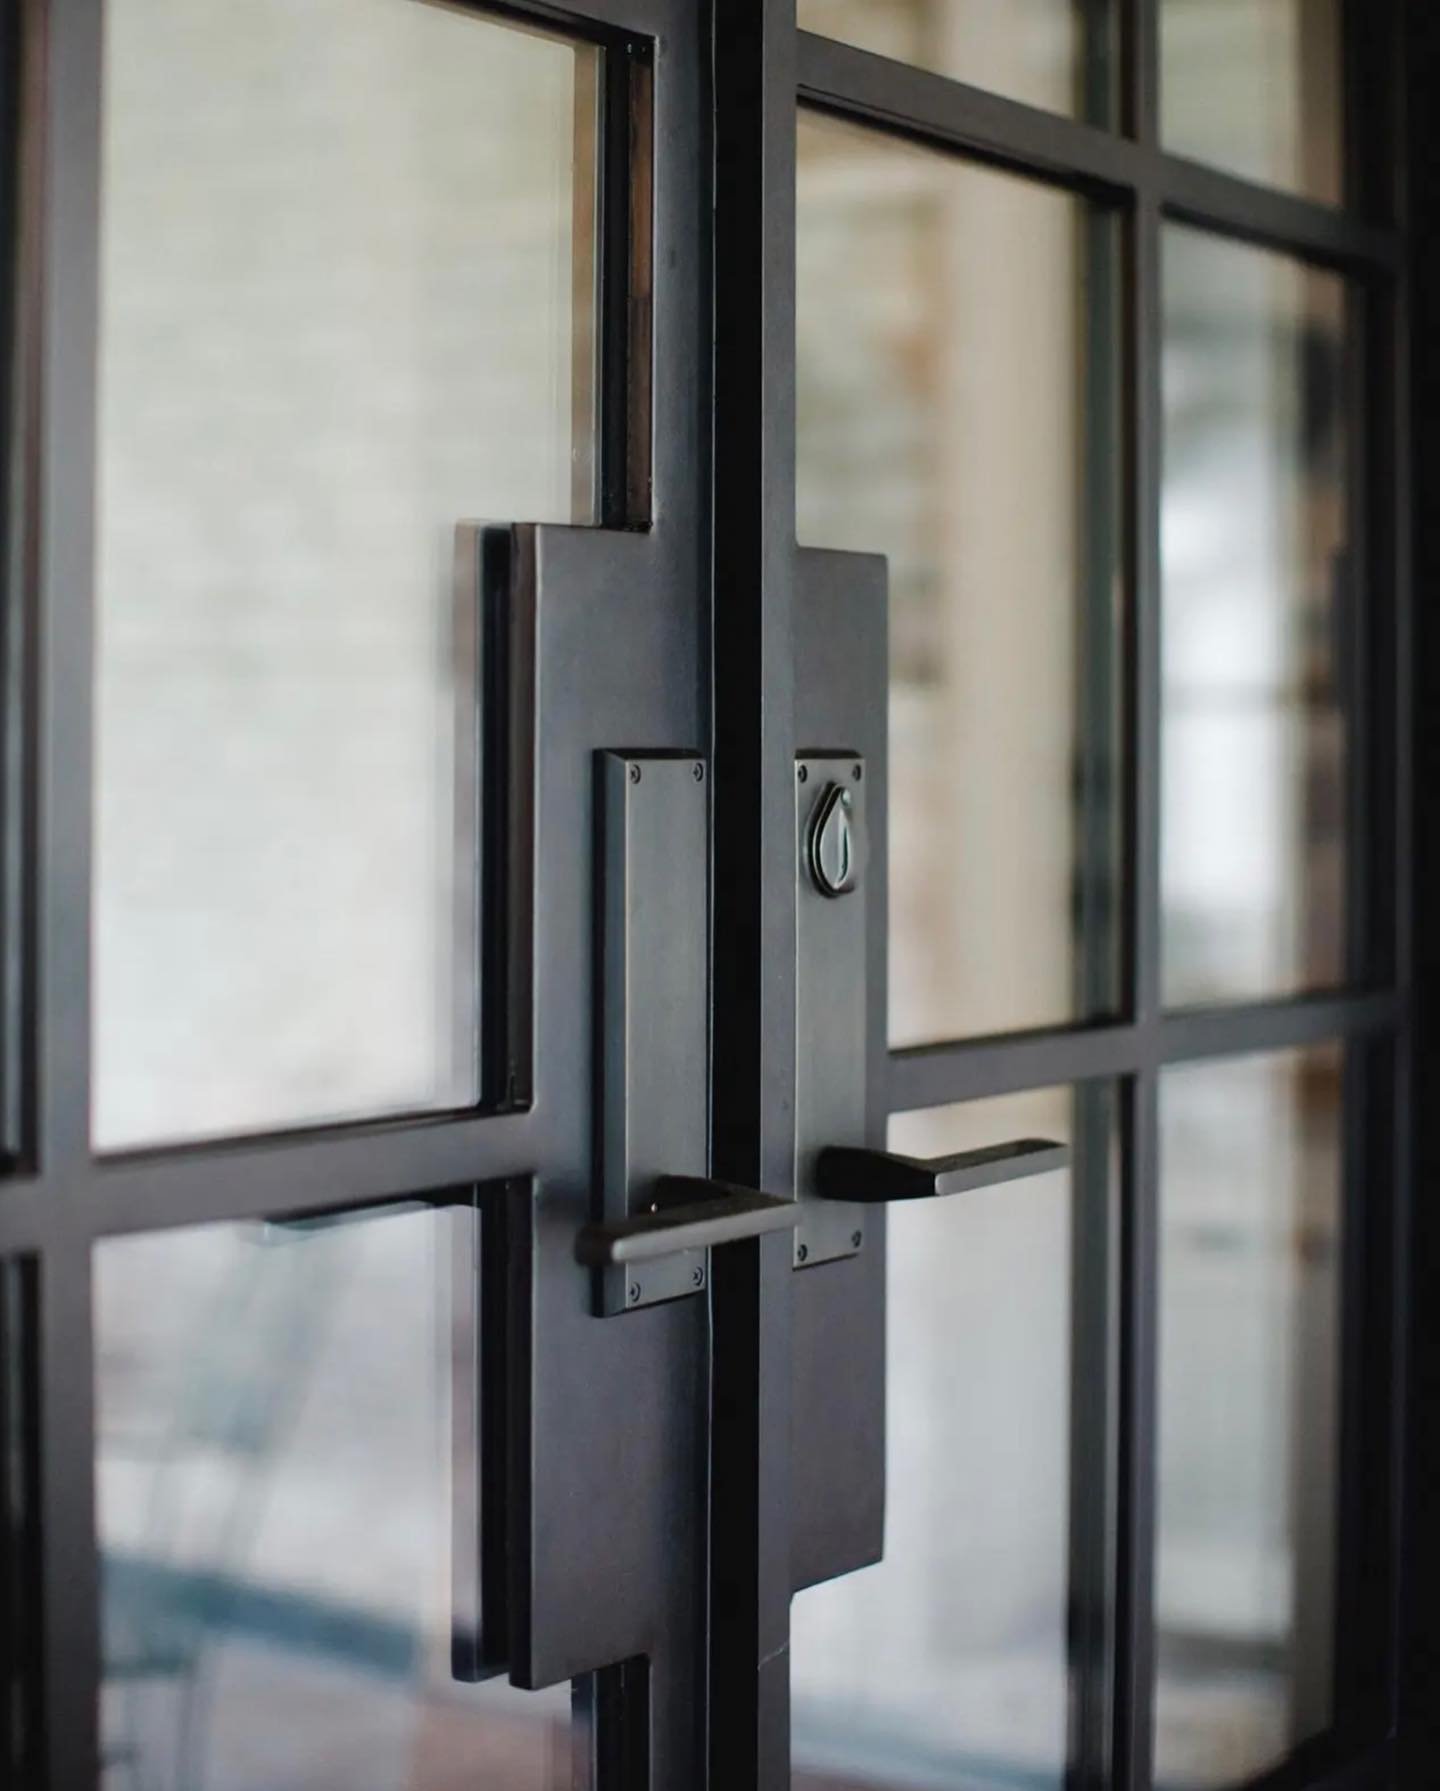 Sleek door trends often focus on minimalism and modern aesthetics. Here are some features that define sleek door designs:

1. Clean Lines: Smooth surfaces and sharp edges create a streamlined appearance.

2. Minimalist Hardware: Concealed or sleek ha